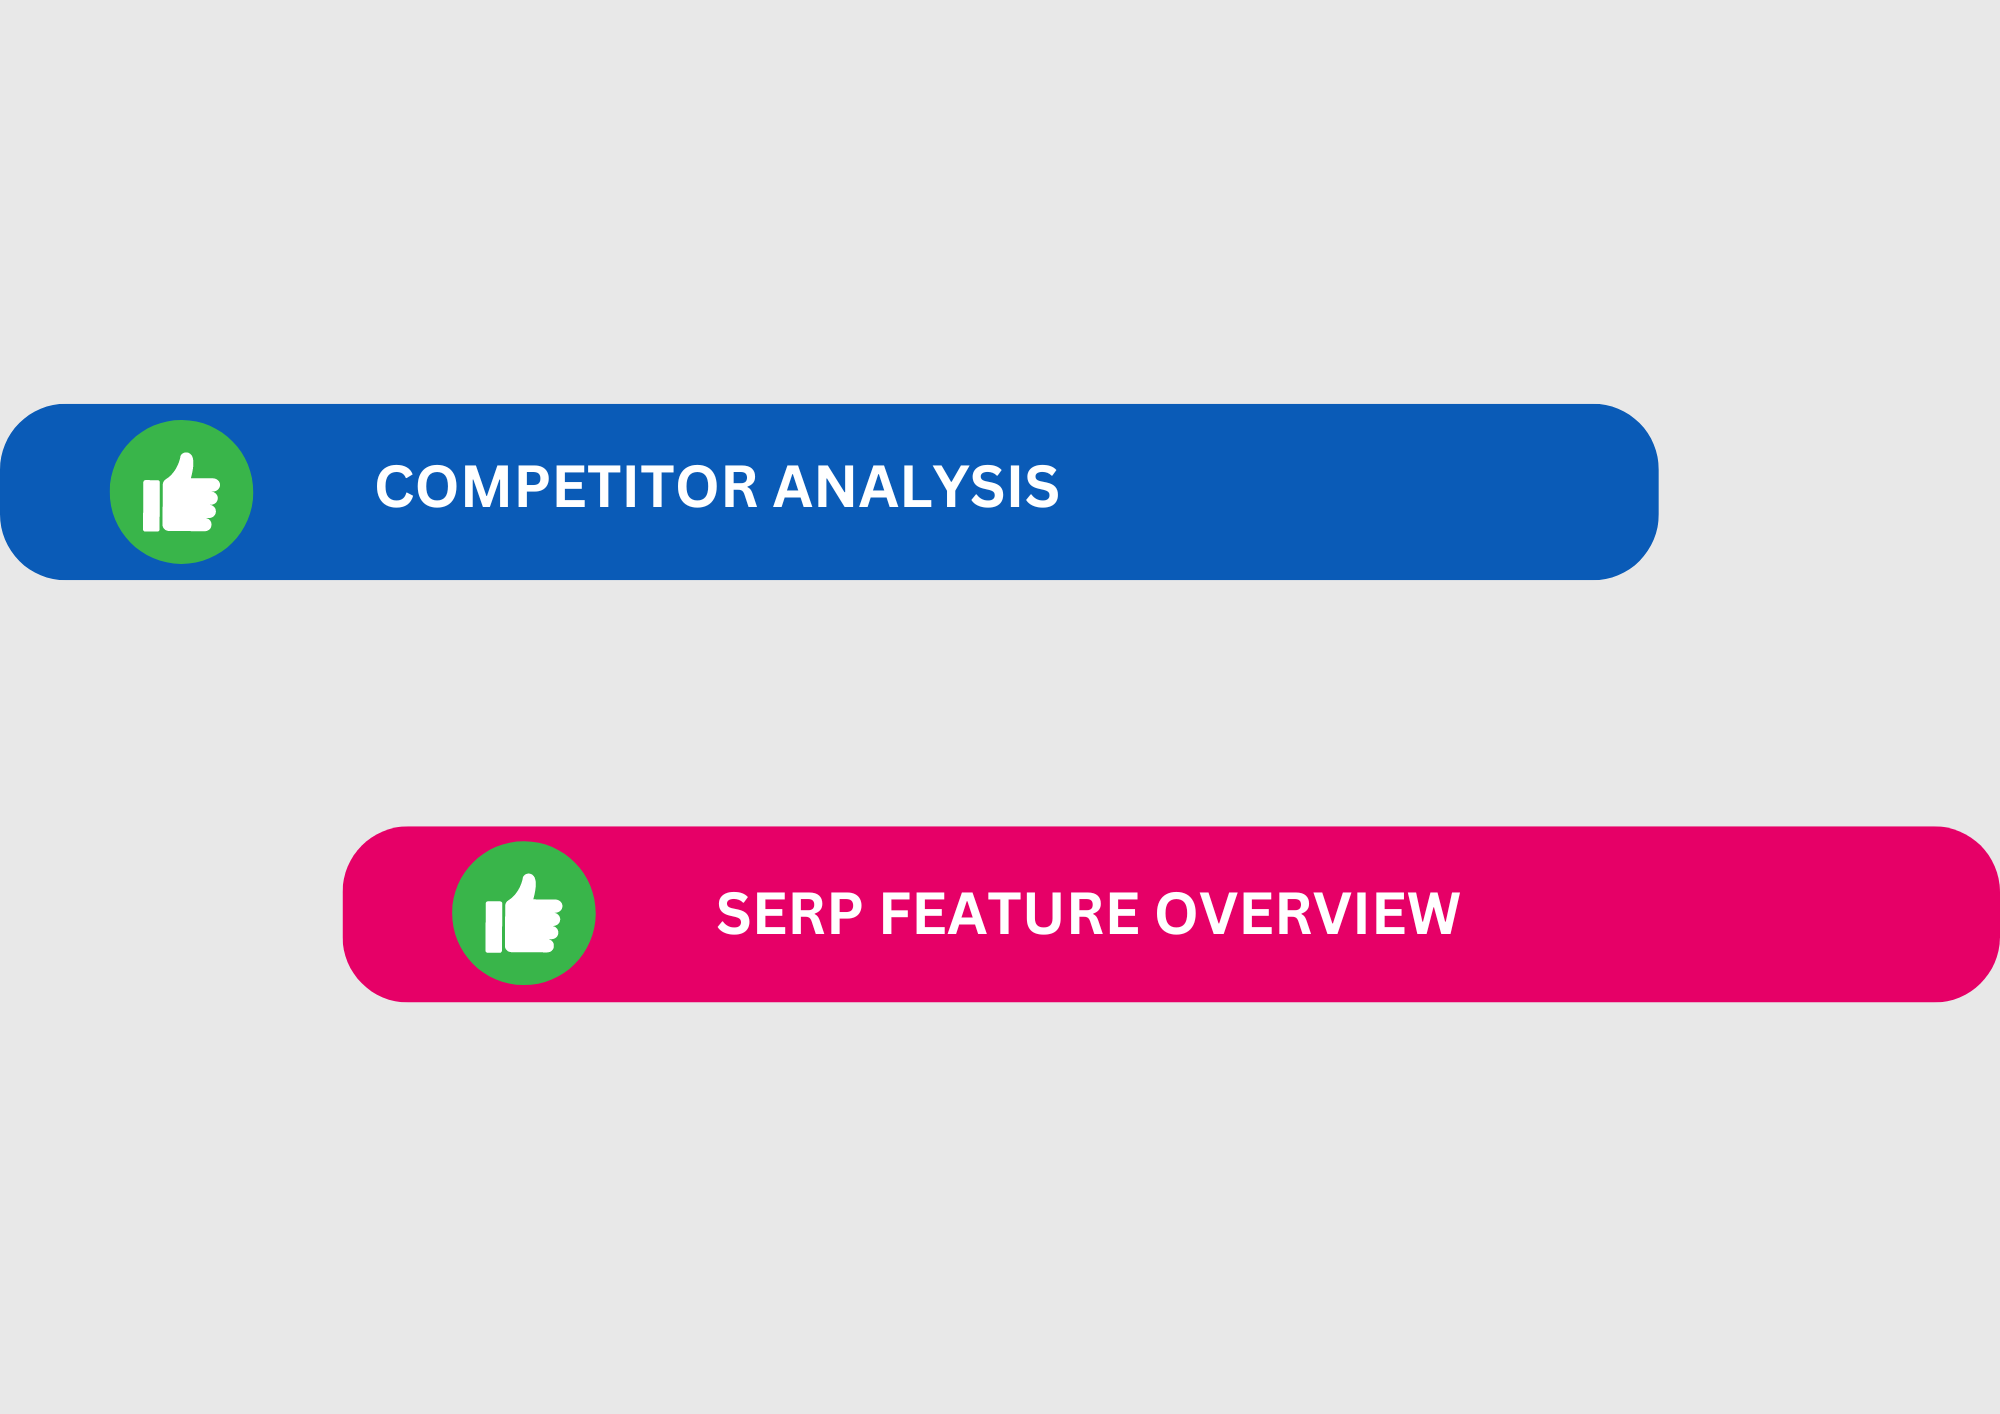 Competitor analysis and serp feature overview